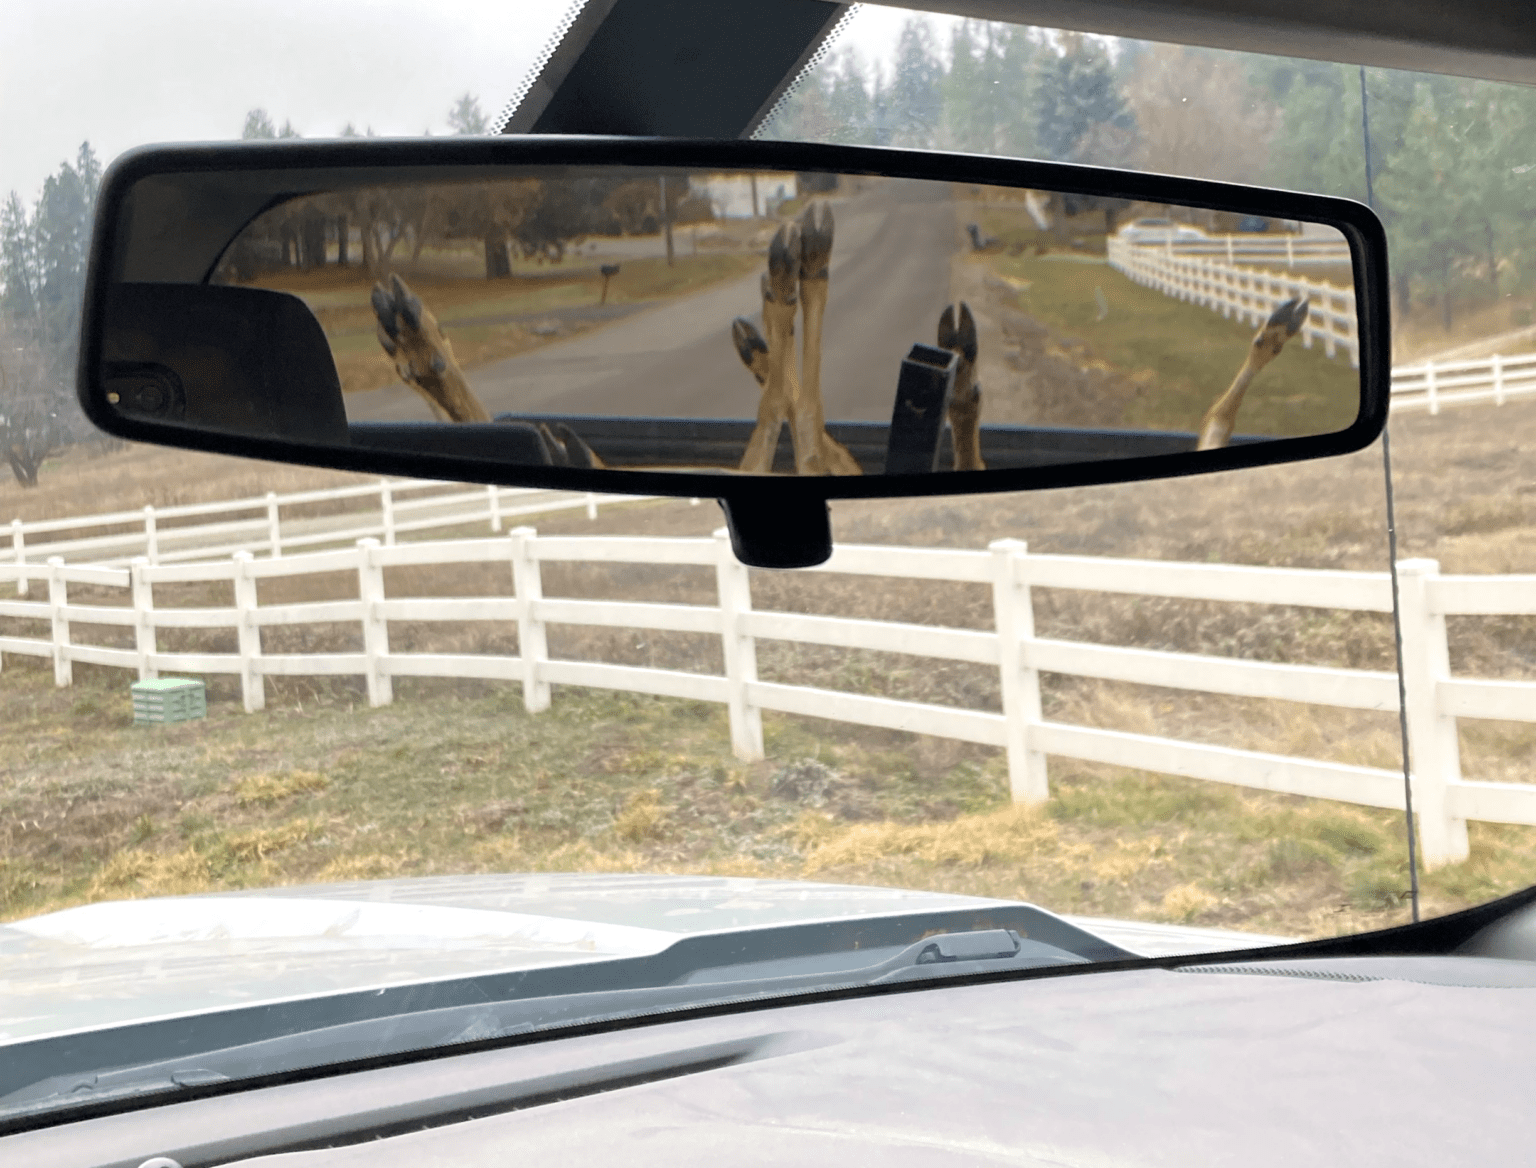 A deer's legs and snout up in the air seen through the front view mirror.